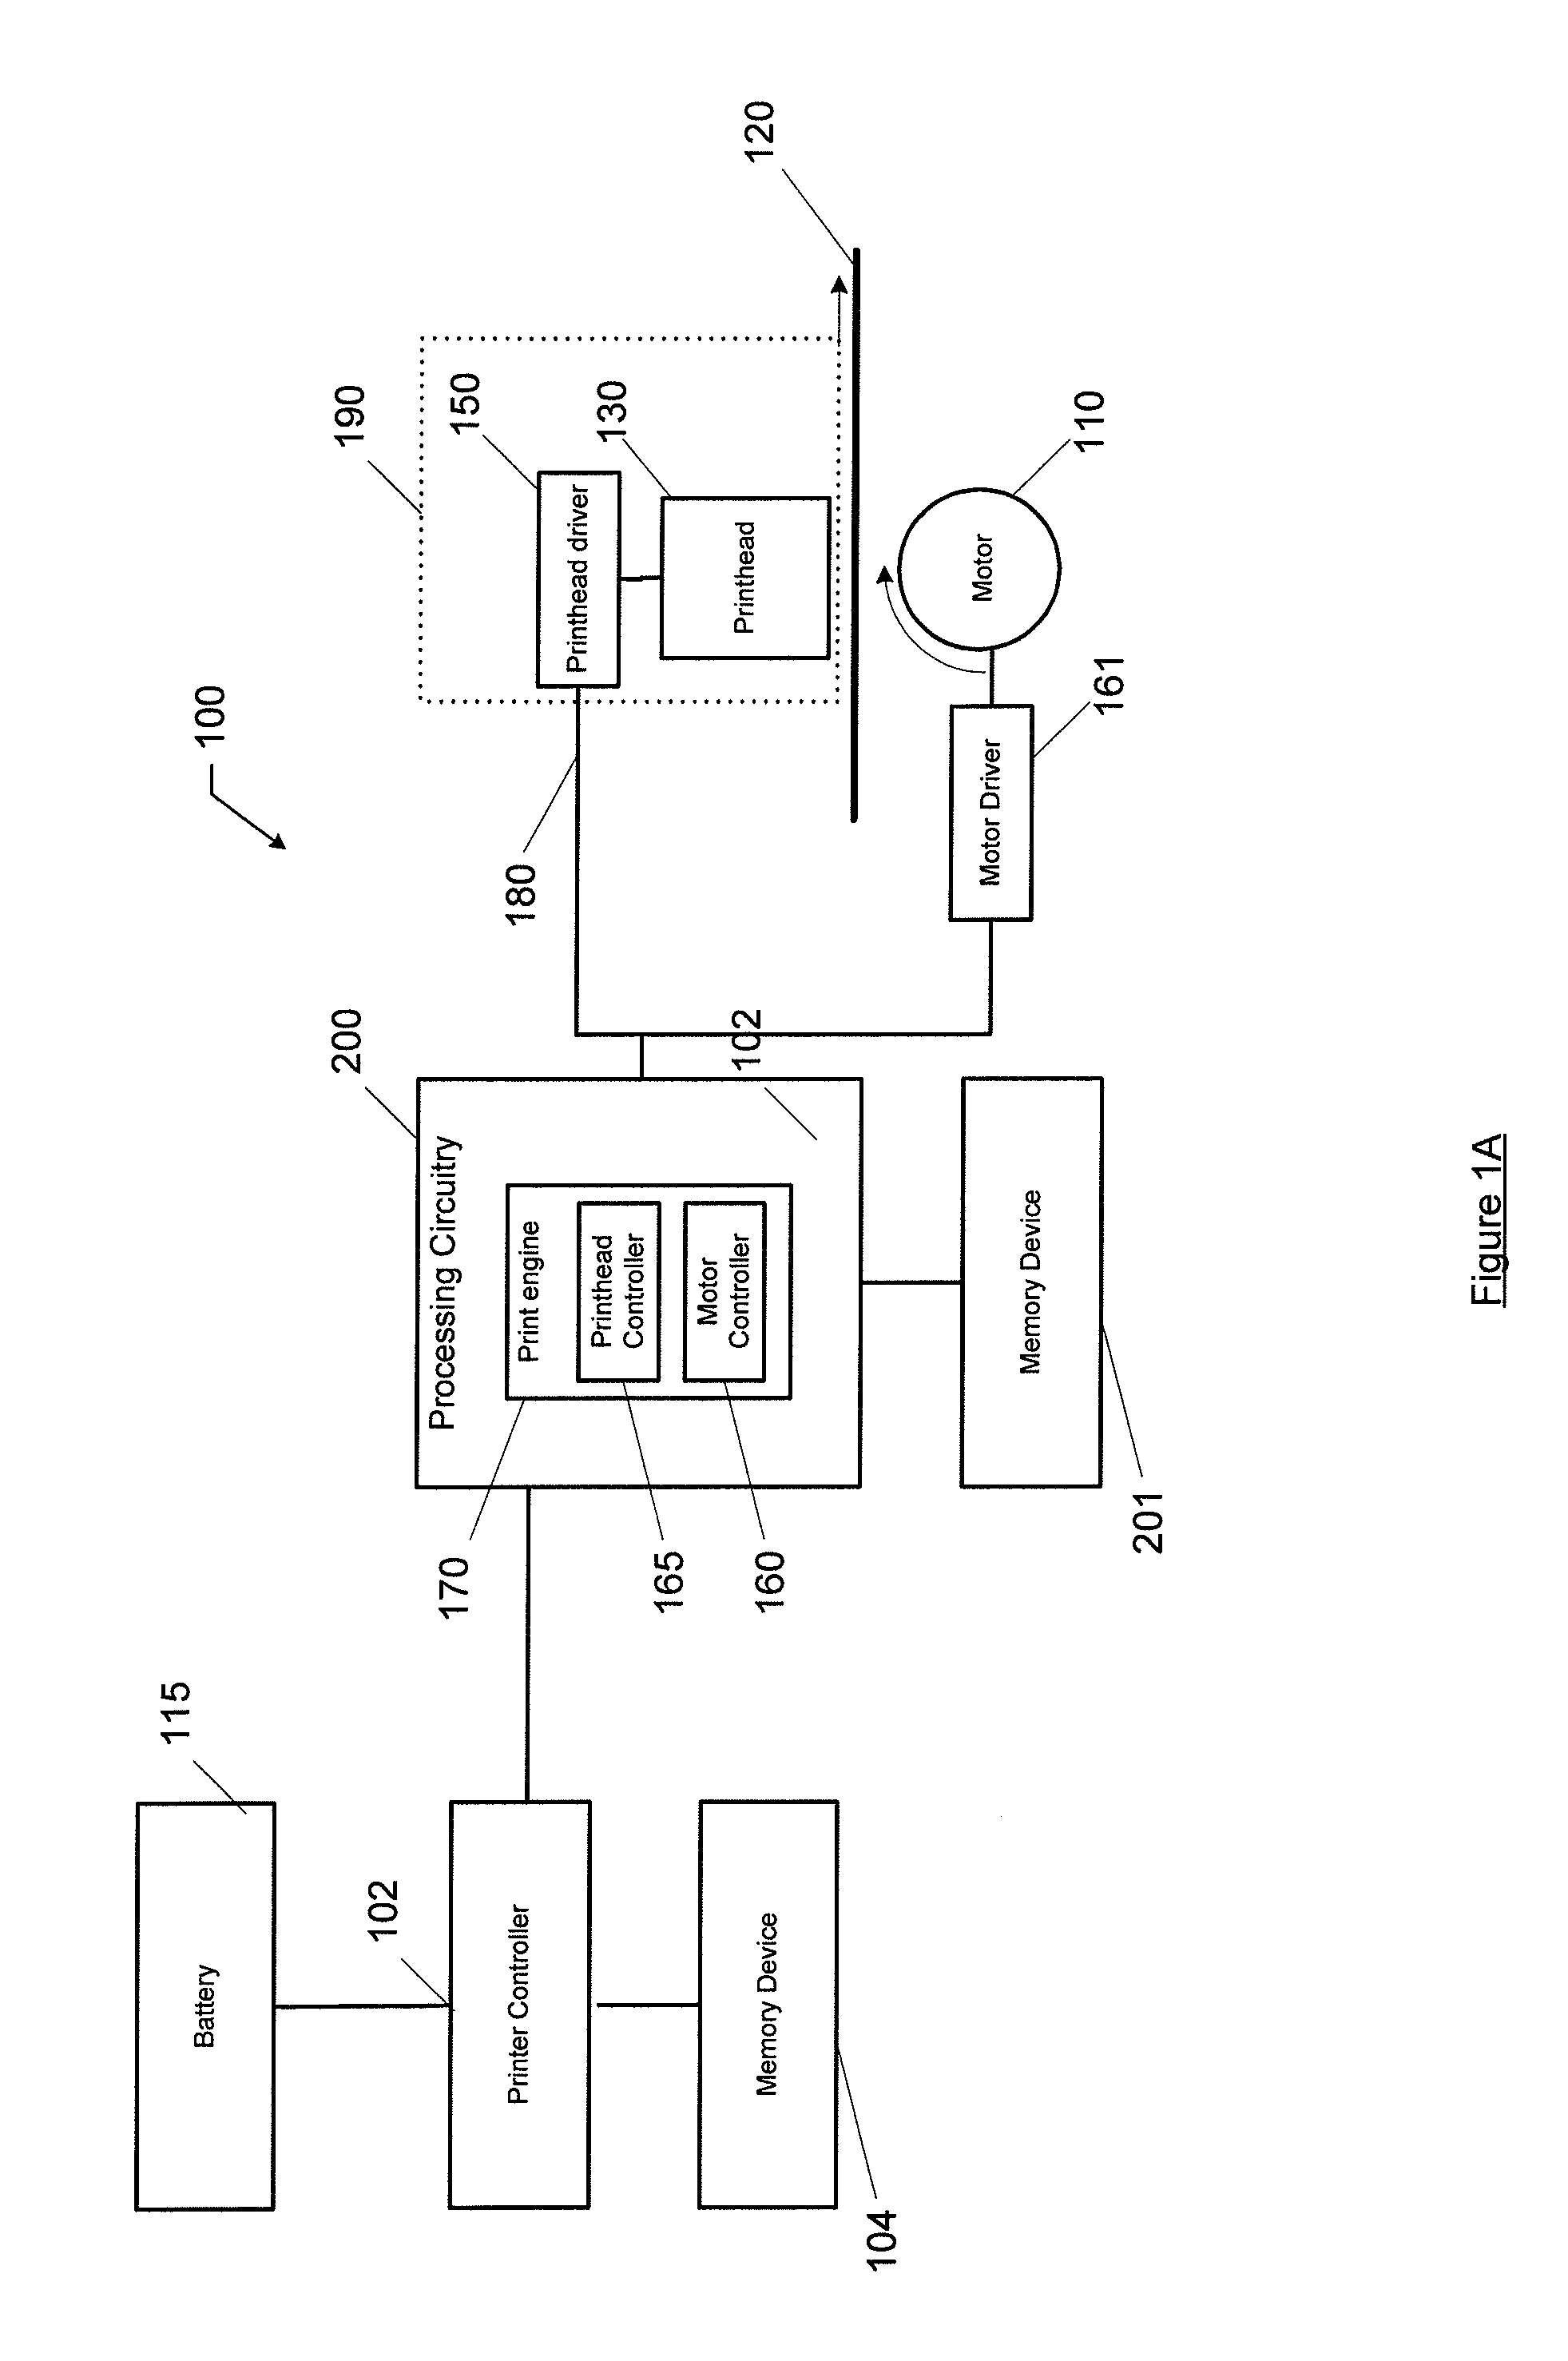 Method and apparatus for printhead control